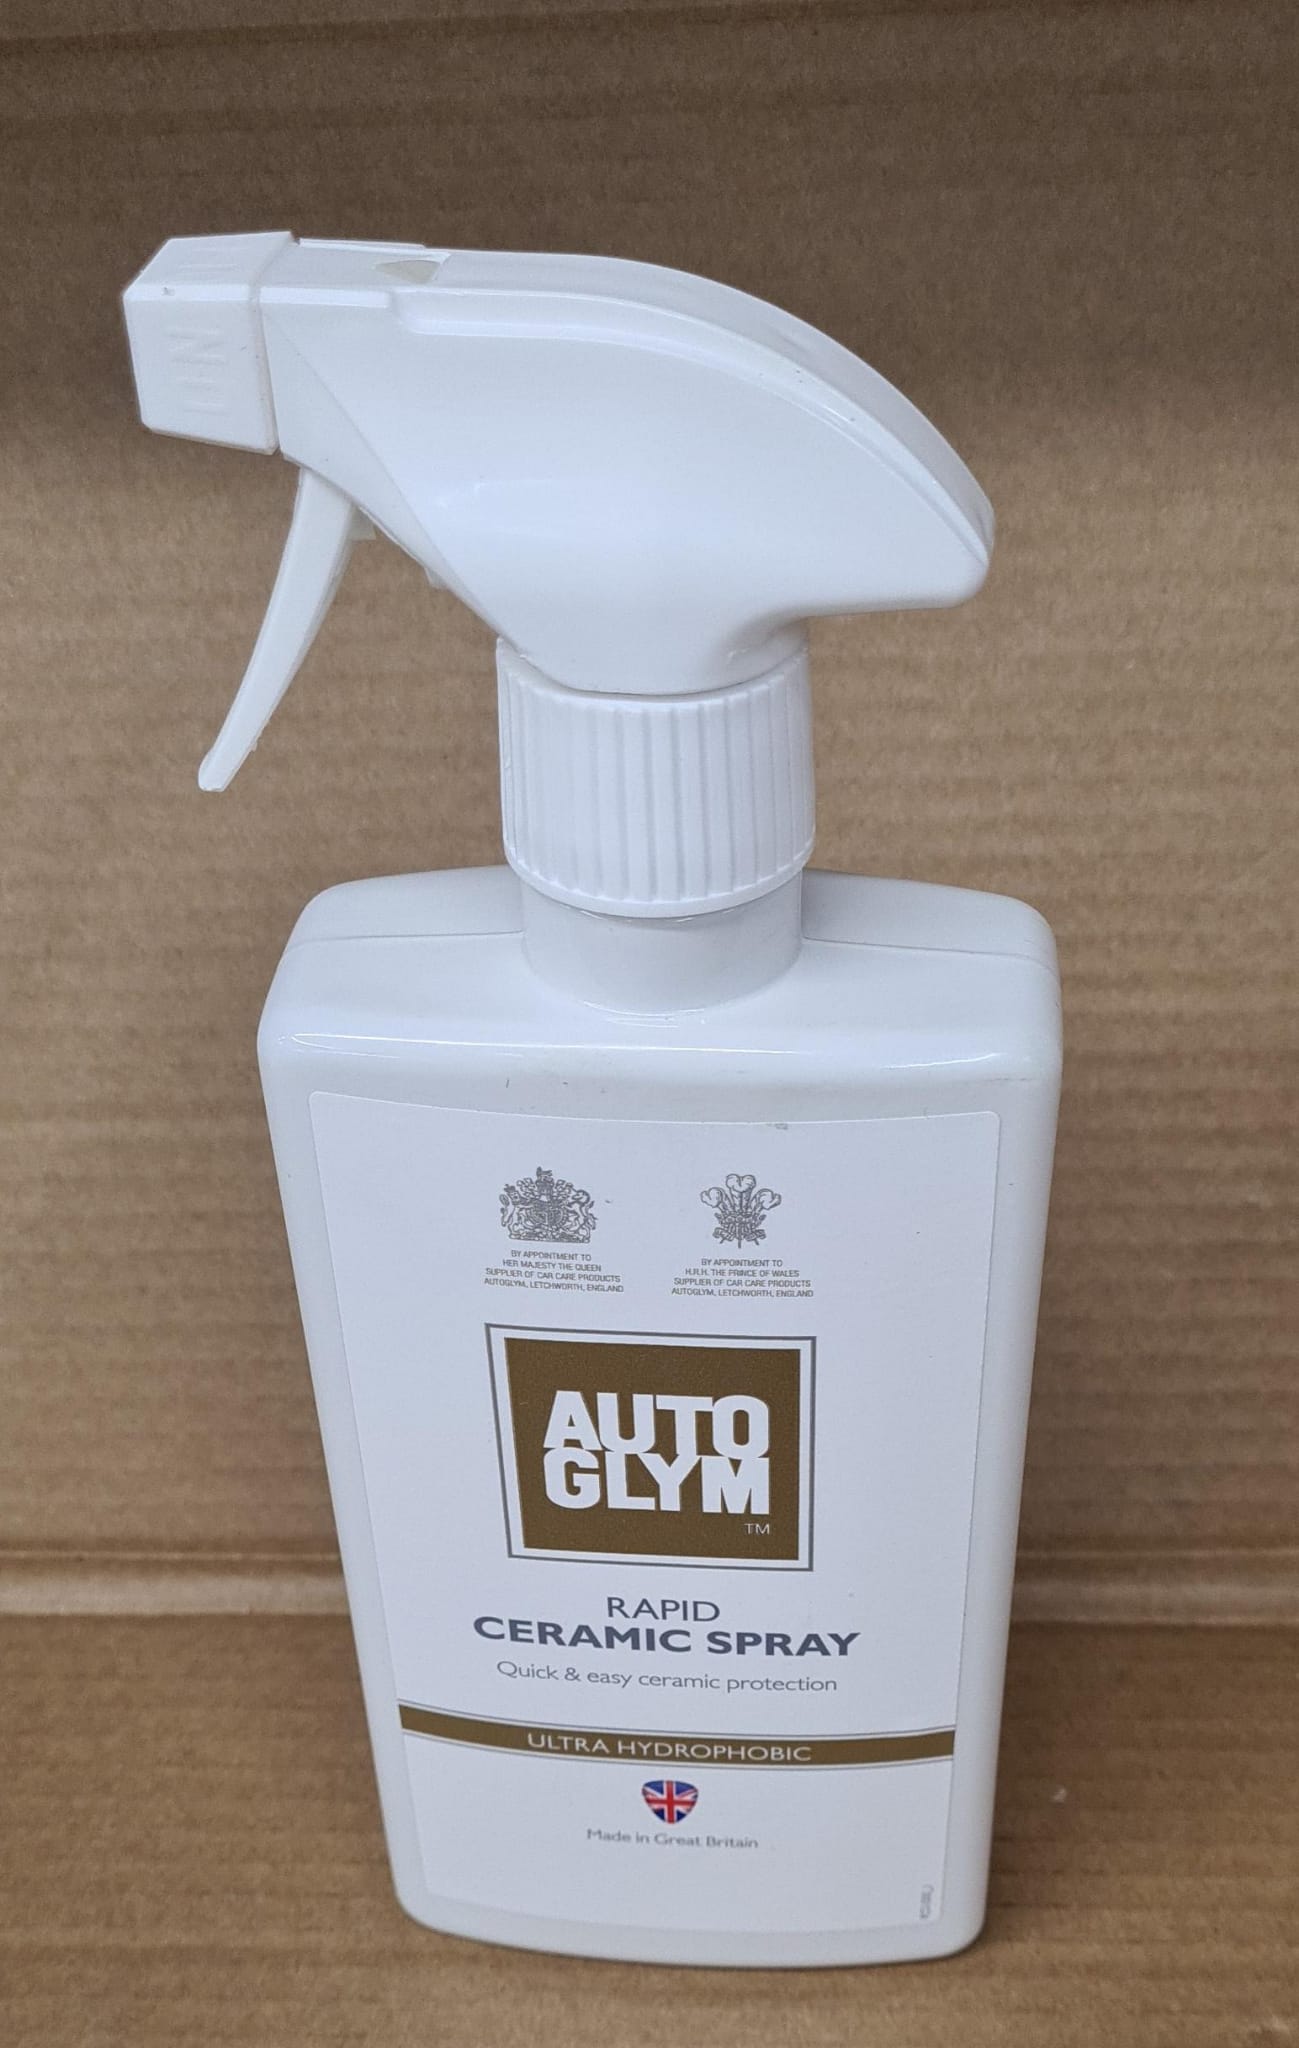 Autoglym Rapid Ceramic Spray Ultra Hydrophobic, 500ml - Tropical Scented Ceramic Coating Car Spray Wax For Superior Paintwork Protection - 3208 